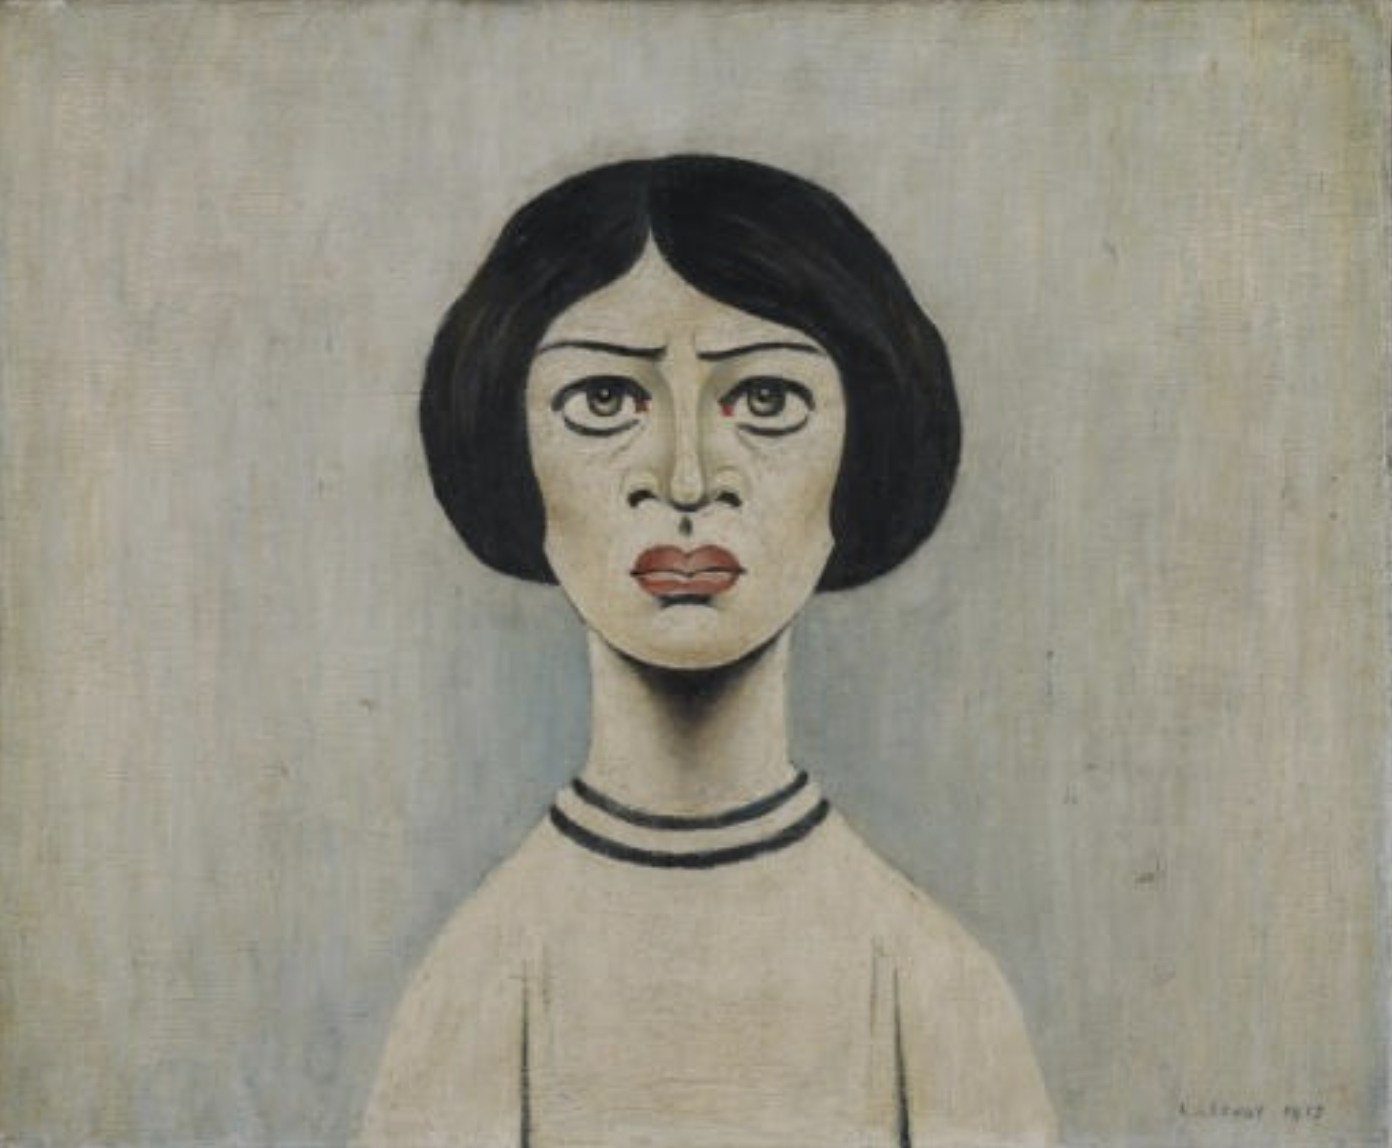 Girl's Head (1955) by Laurence Stephen Lowry (1887 - 1976), English artist.